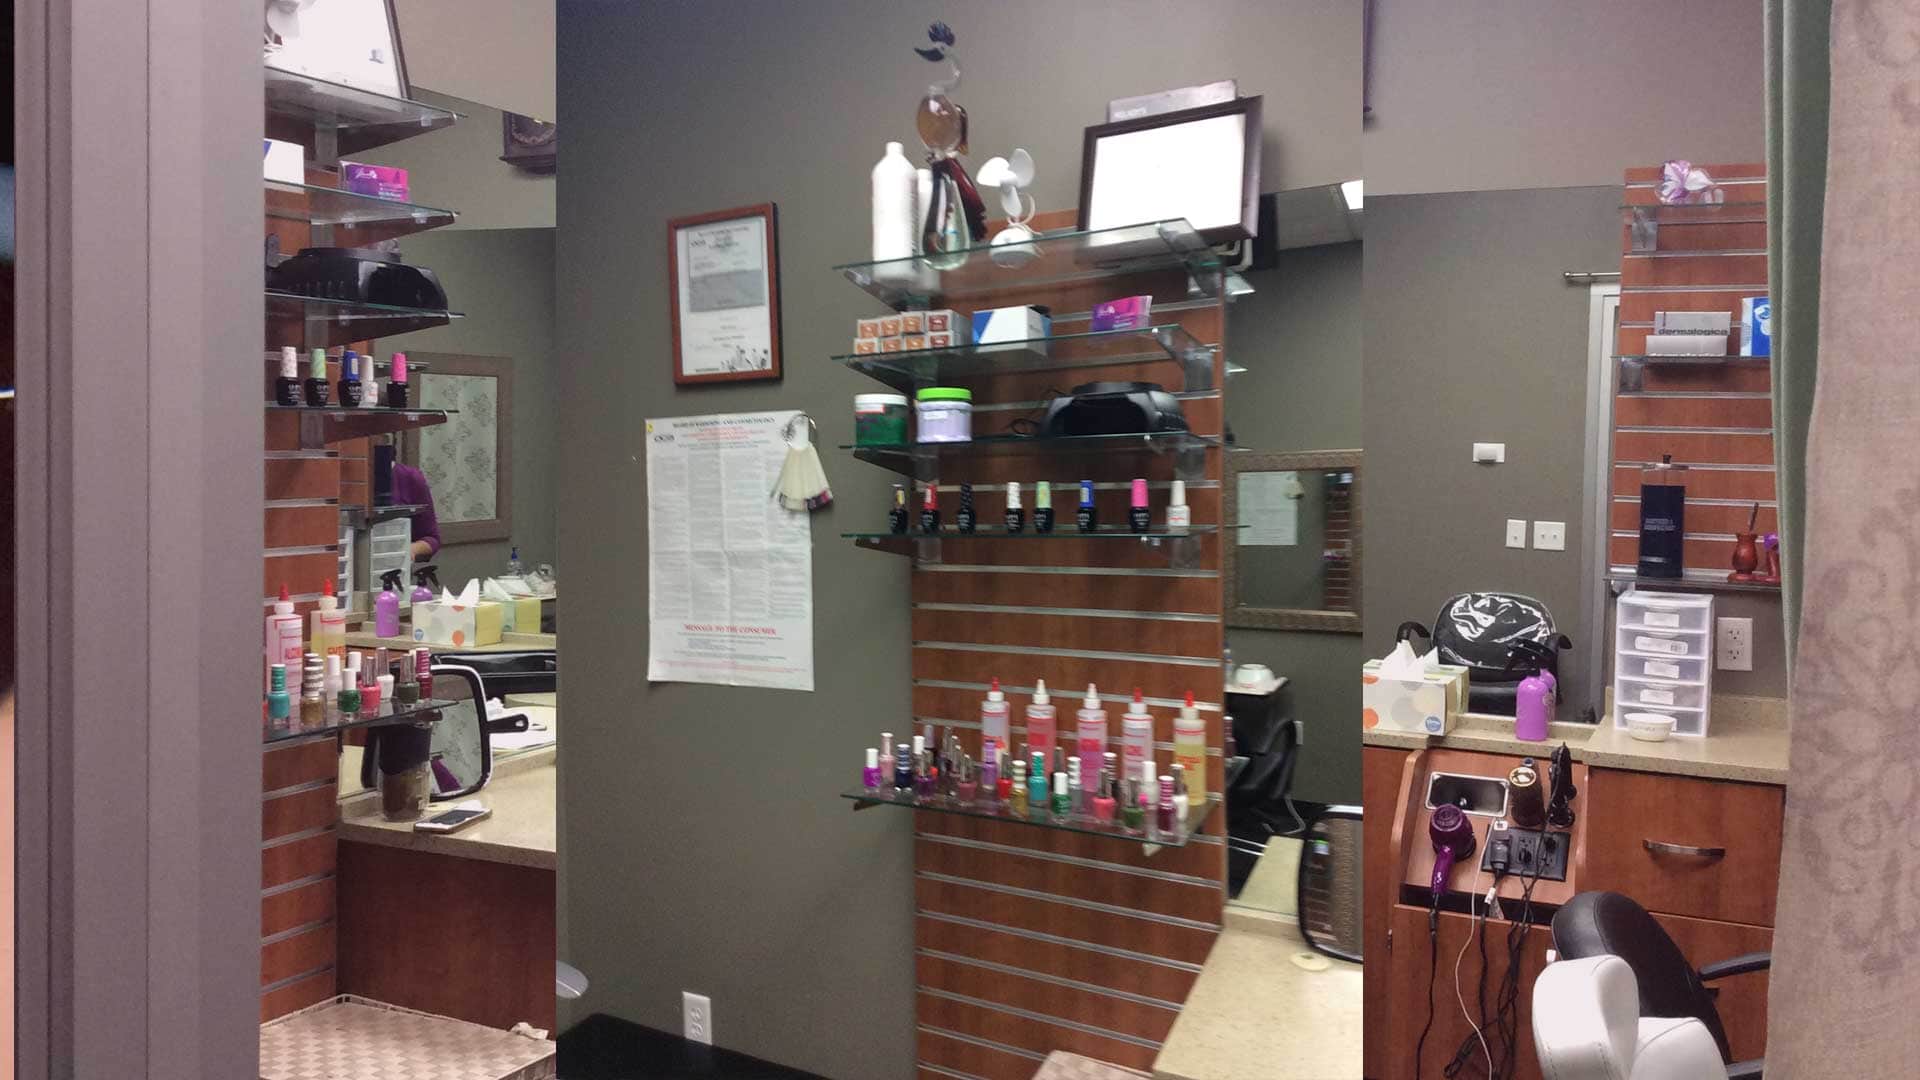 Jhansi Beauty Care - Best Beauty Salon in Cupertino, California, US, the hair lounge